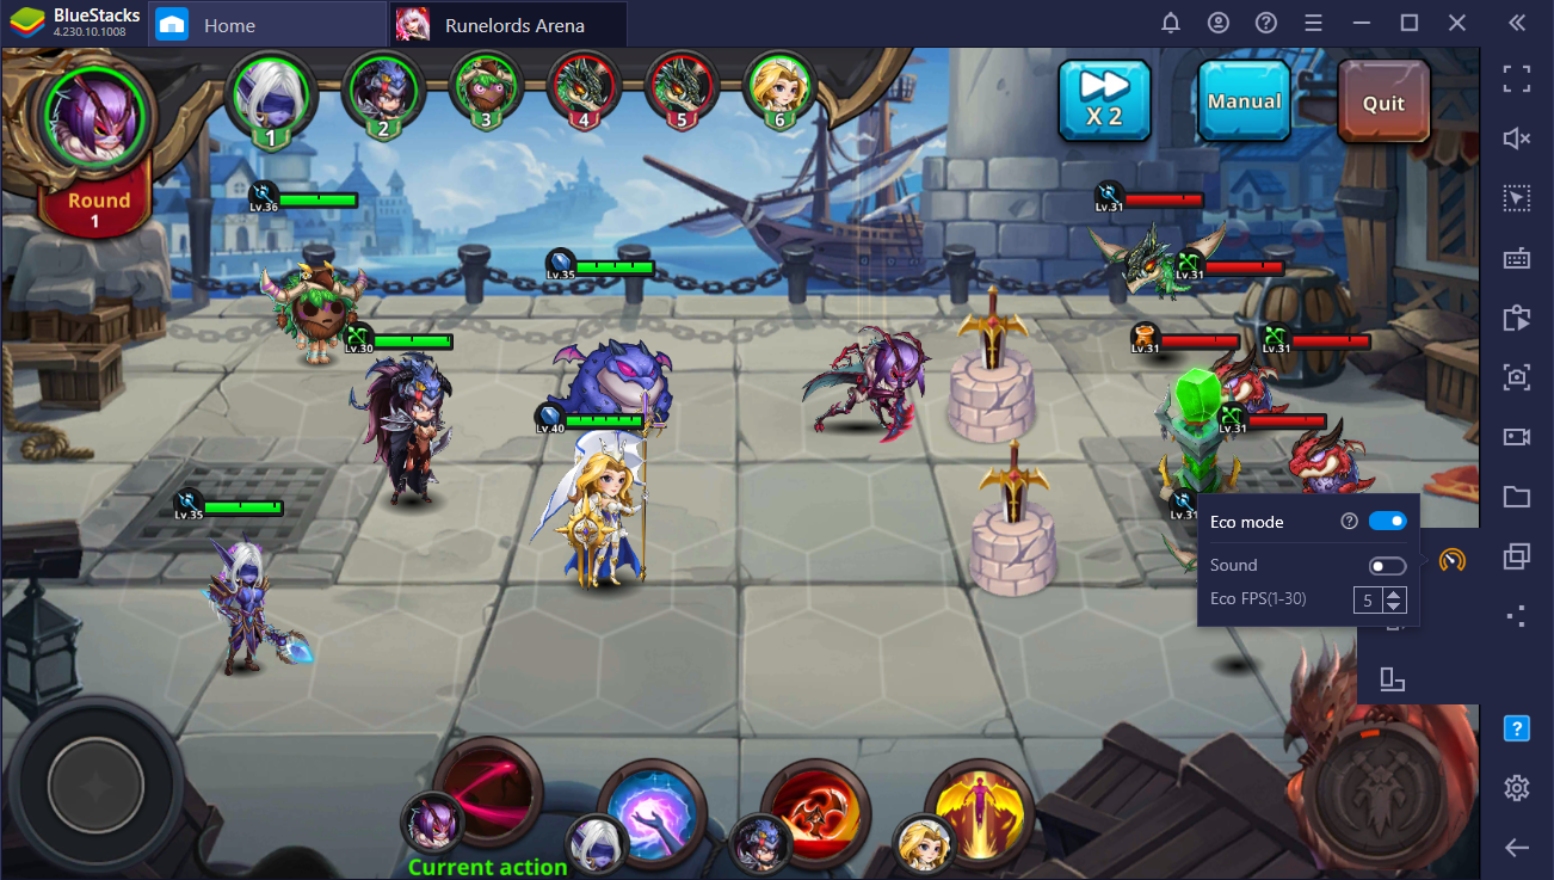 How to Play Runelords Arena on PC with BlueStacks